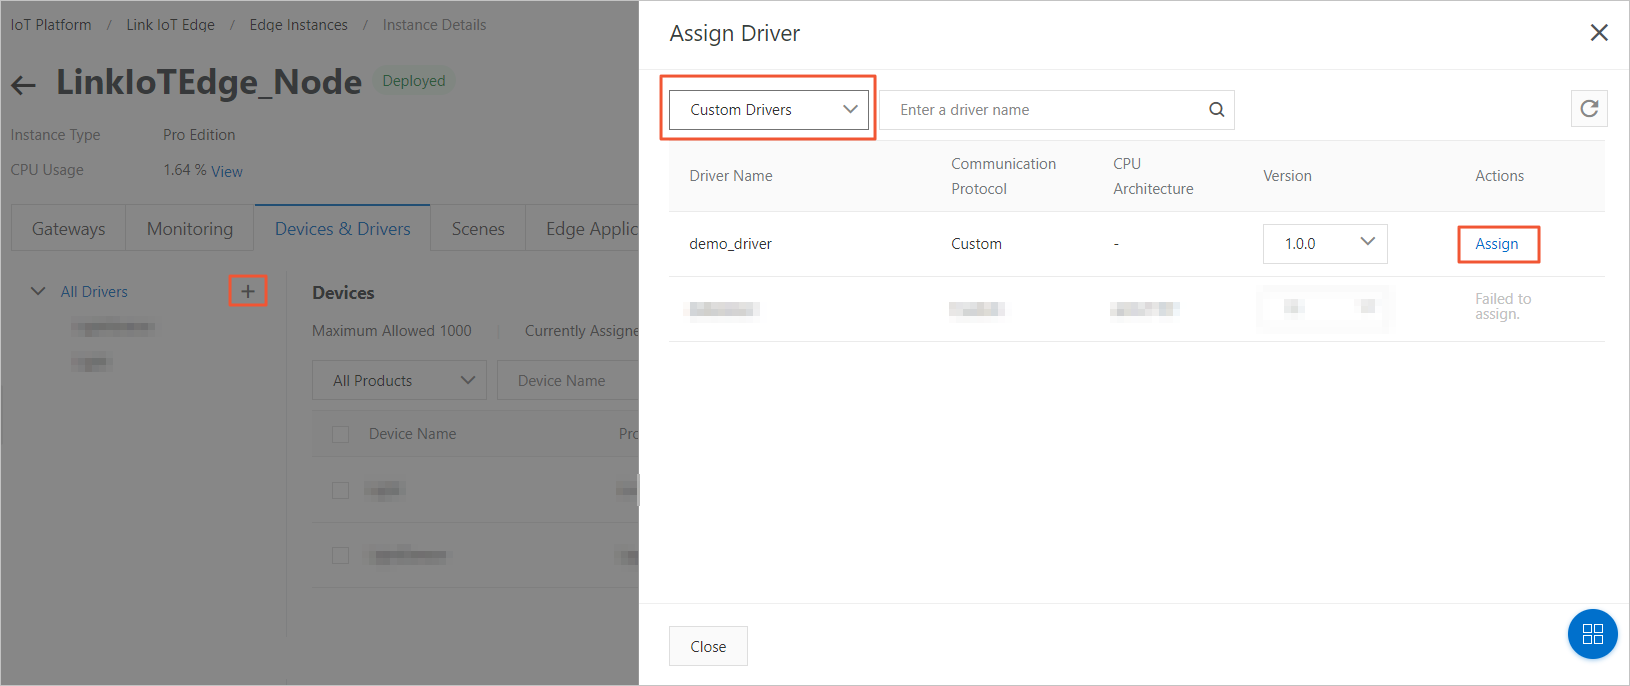 Assign the custom driver to the edge instance